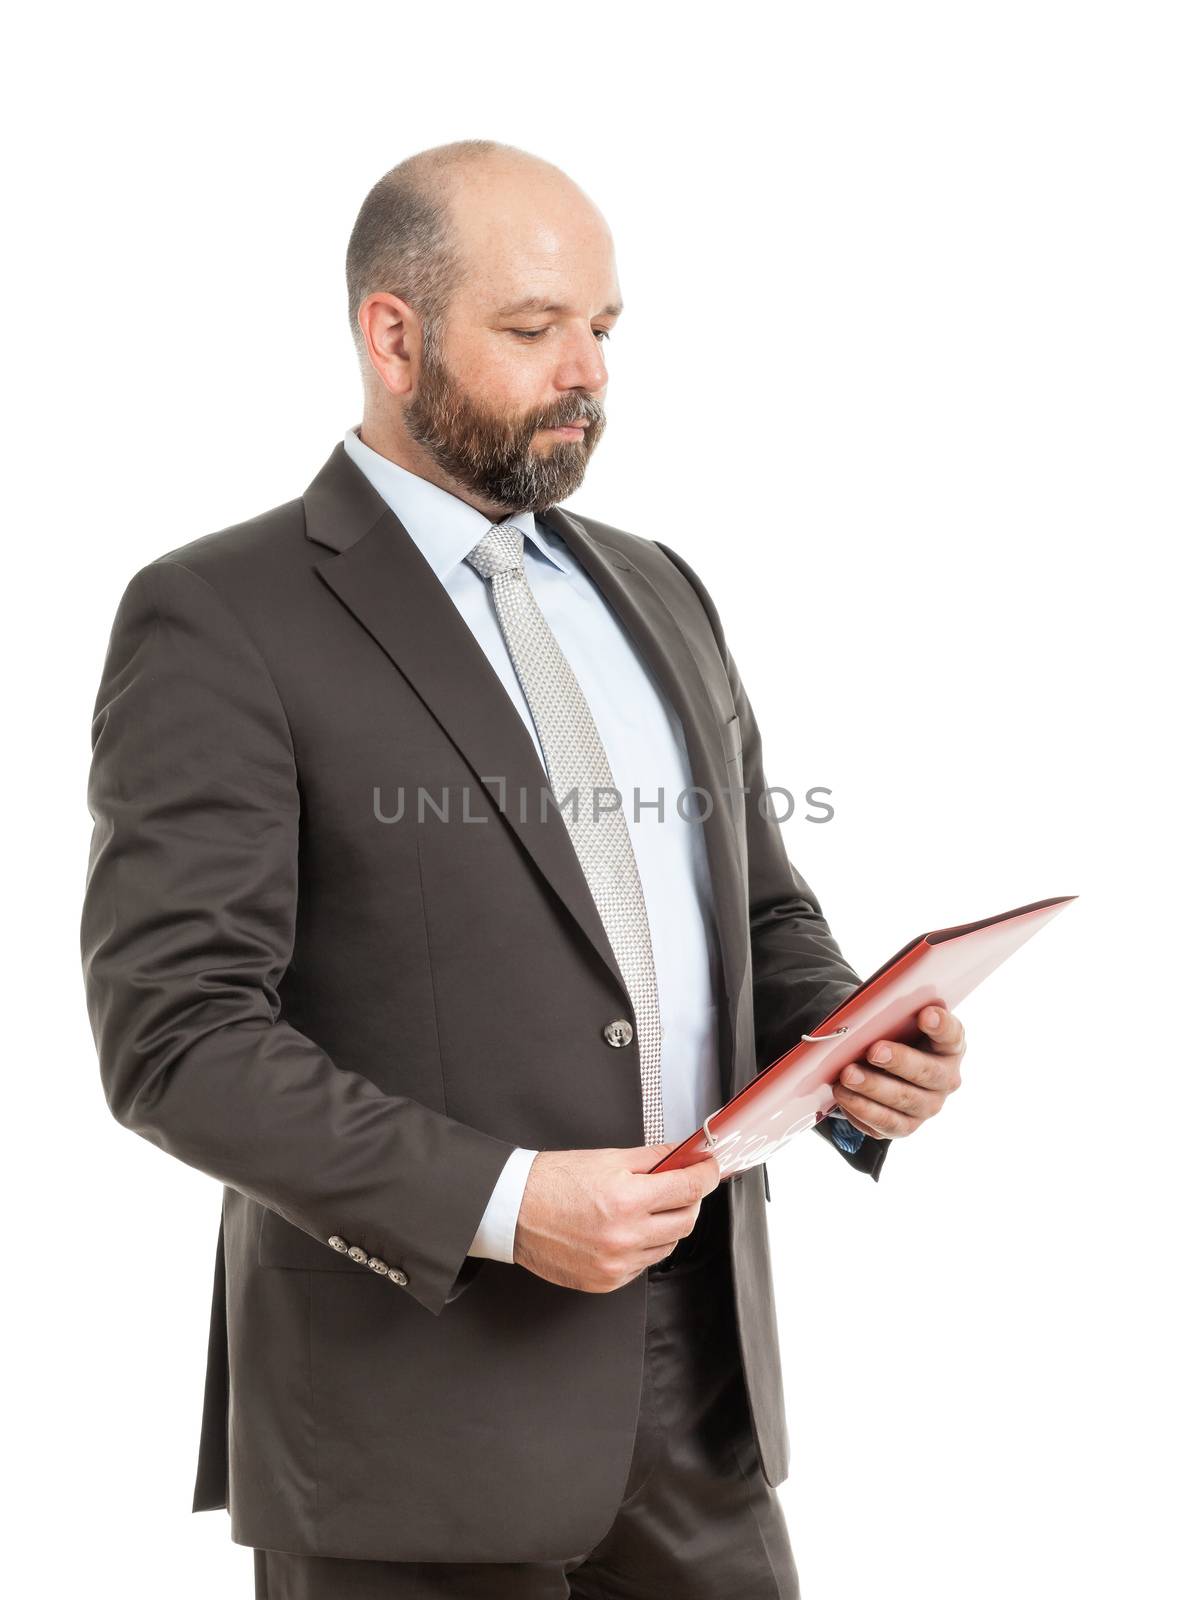 An image of a handsome business man with a red folder